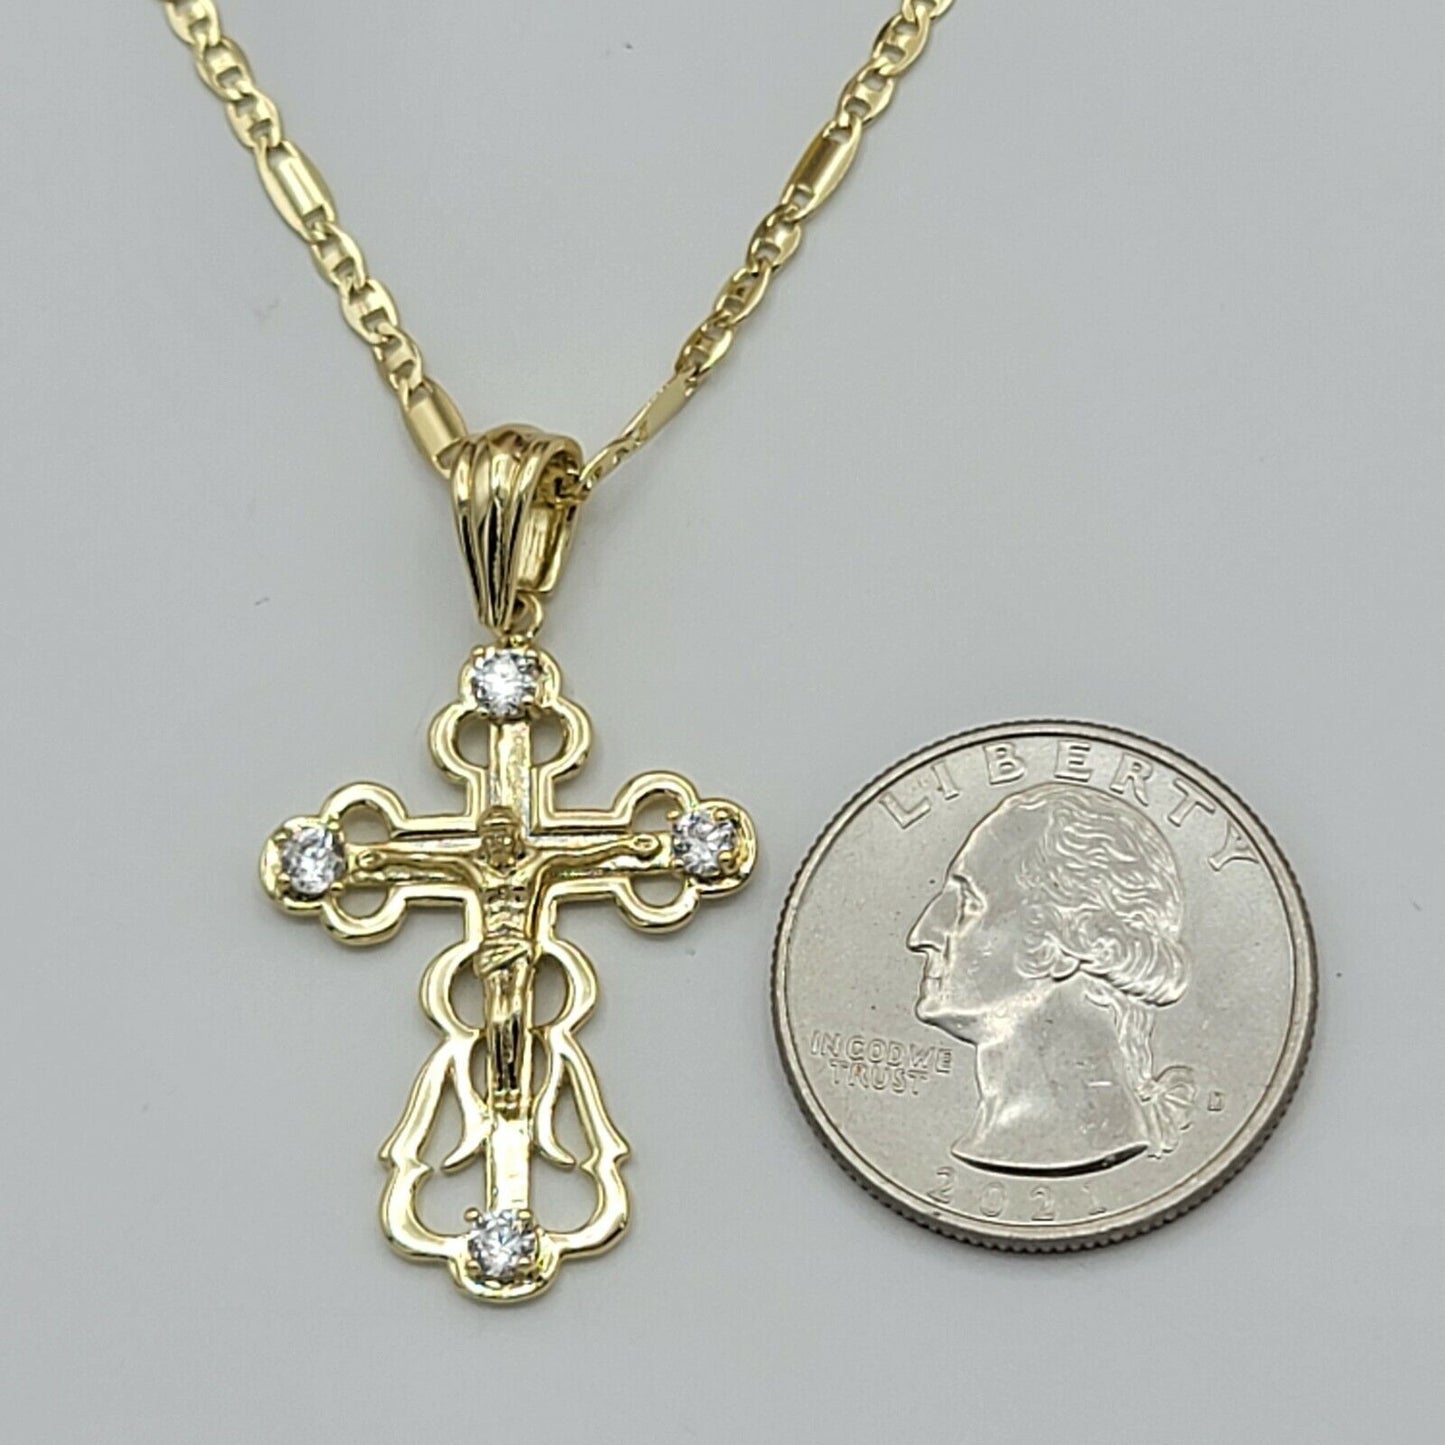 Necklaces - 14K Gold Plated. Crucifix Cross Pendant & Chain.